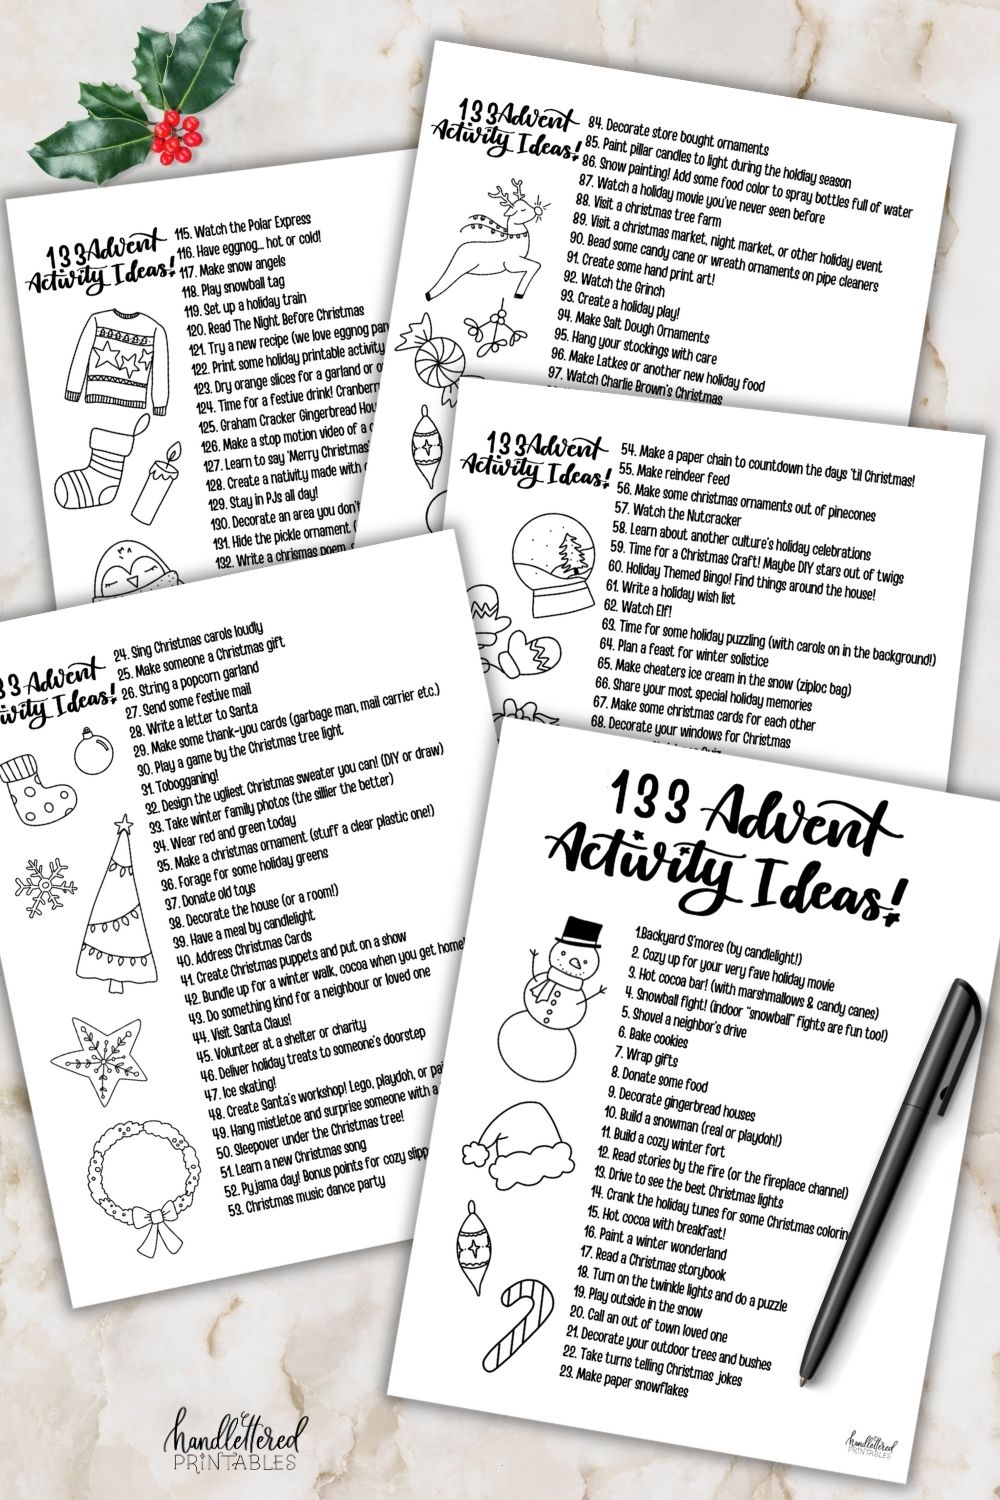 Christmas advent activity calendar list of ideas- image shows 5 page list printed on countertop with pen and holly